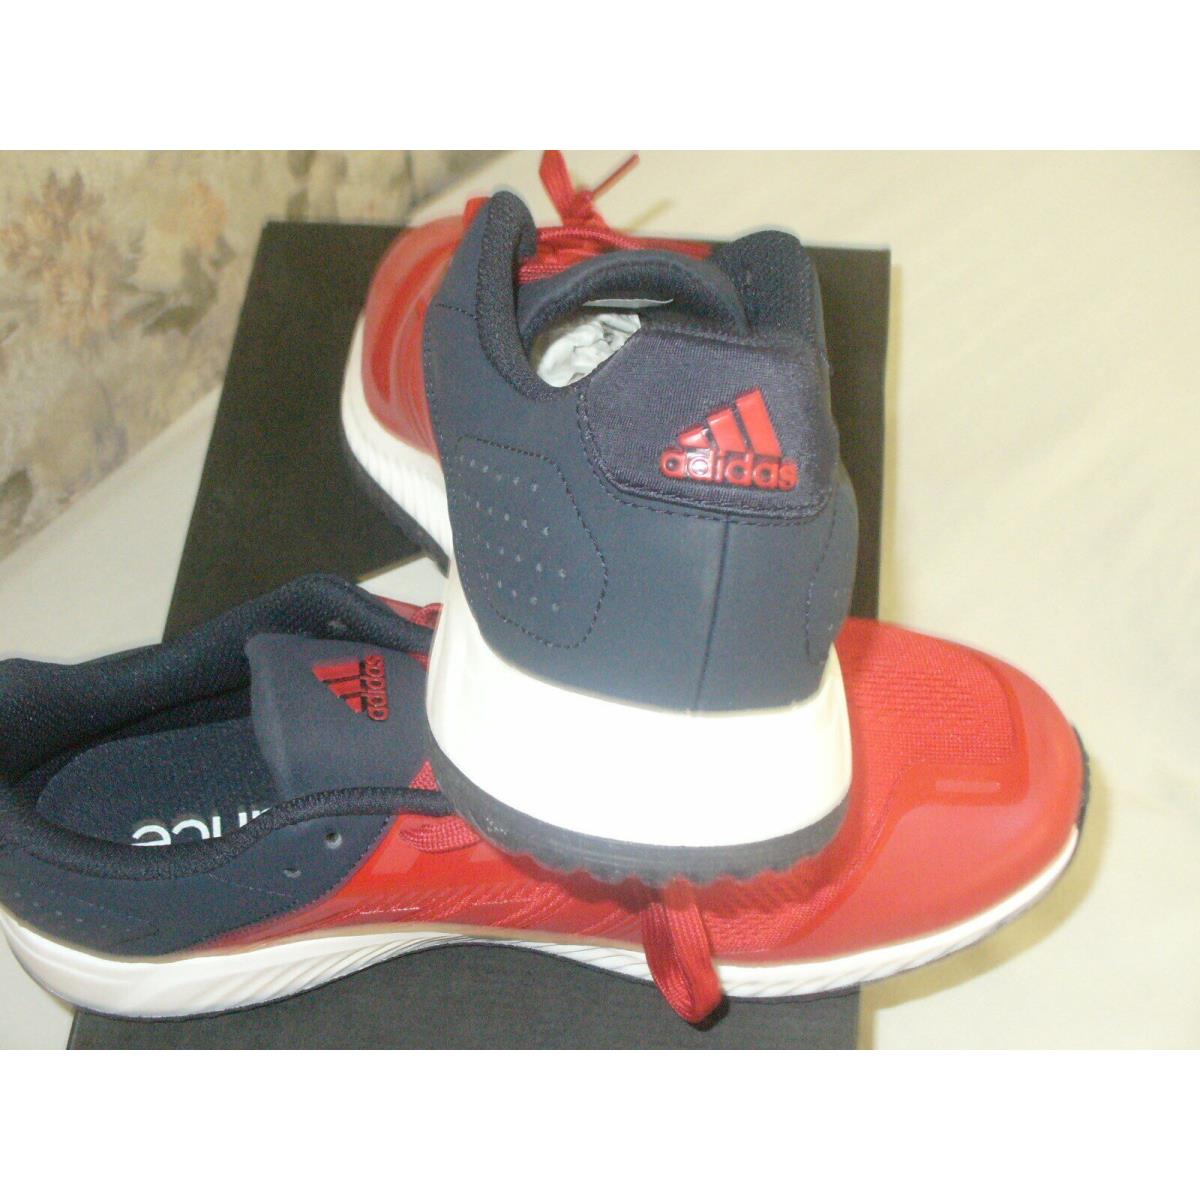 Adidas shoes  - Red/Black 2